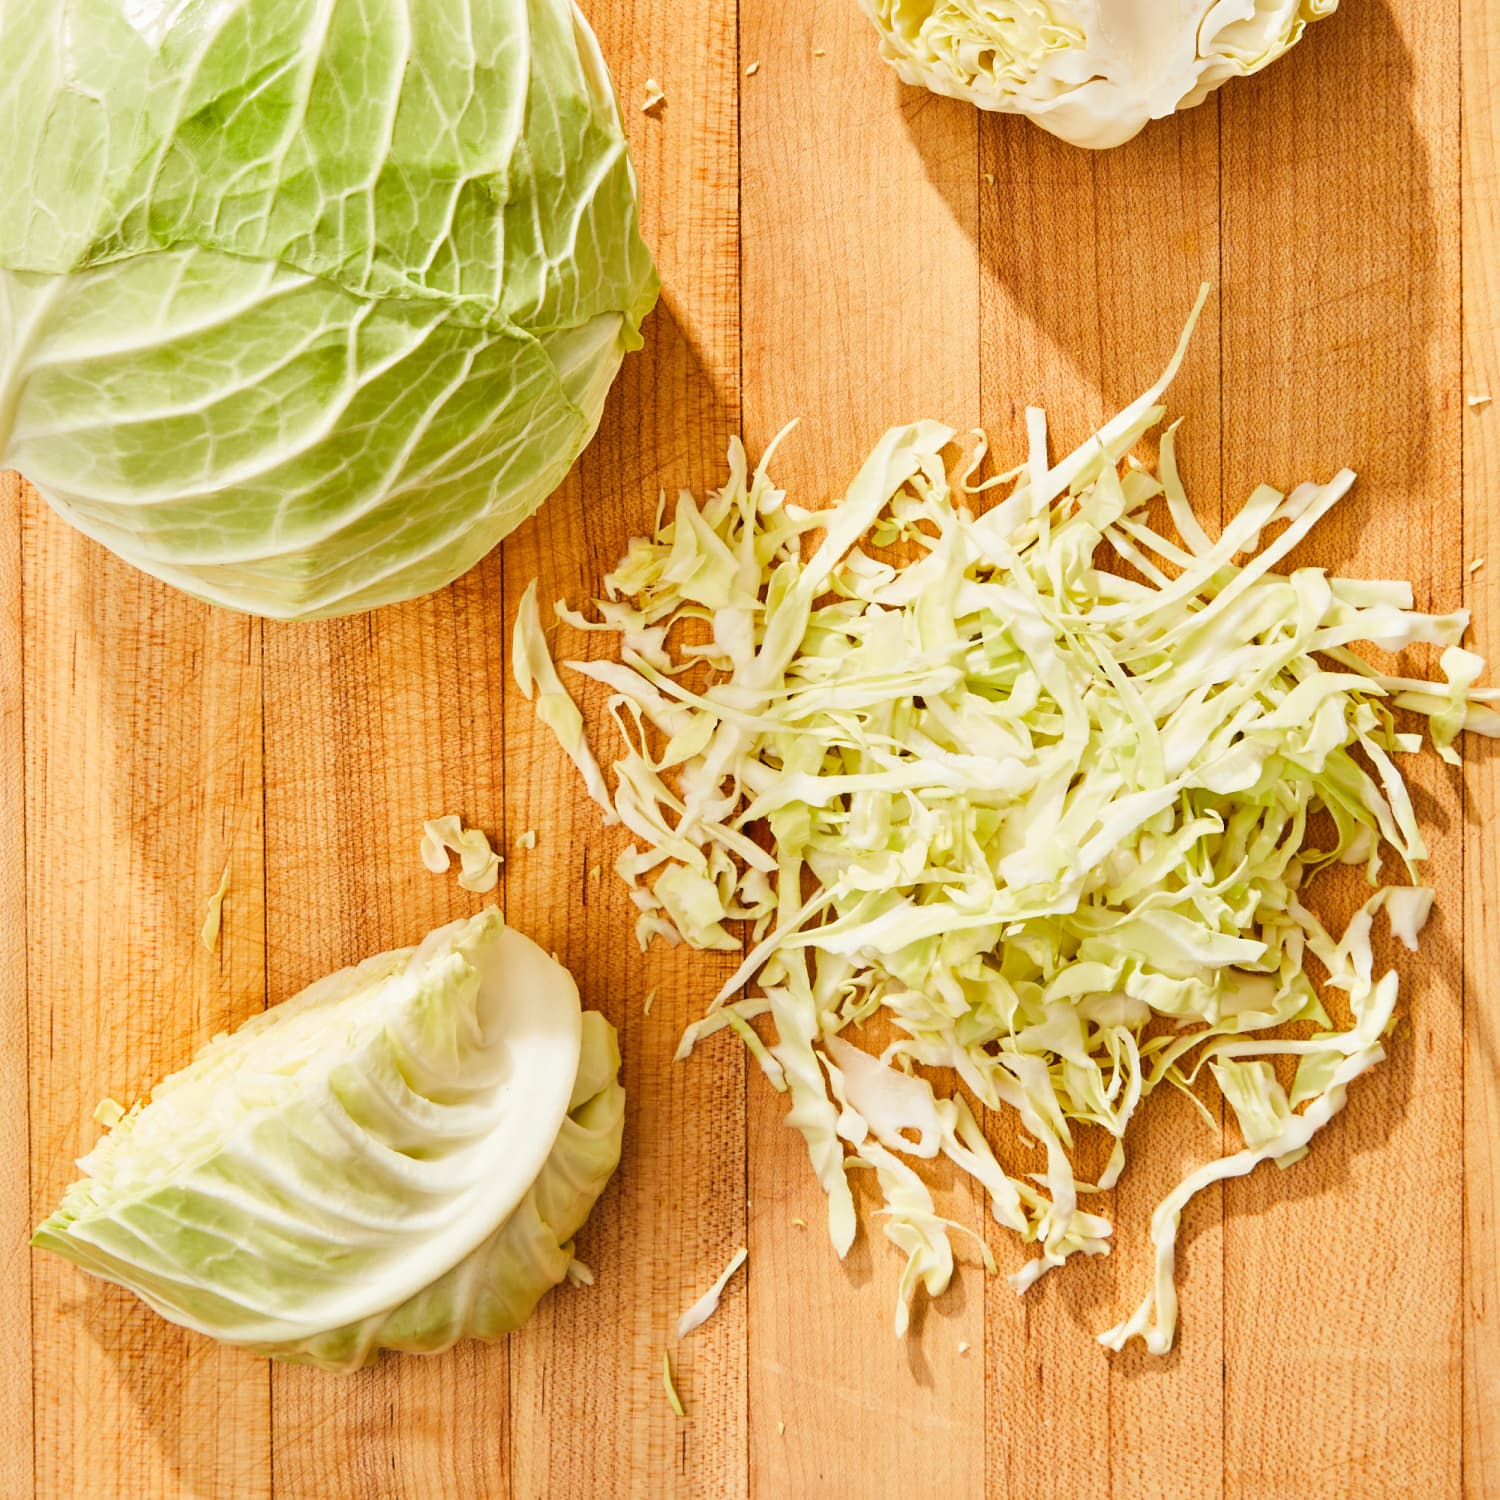 How to Cut Cabbage (Shred, Slice, or Chop) - Fifteen Spatulas